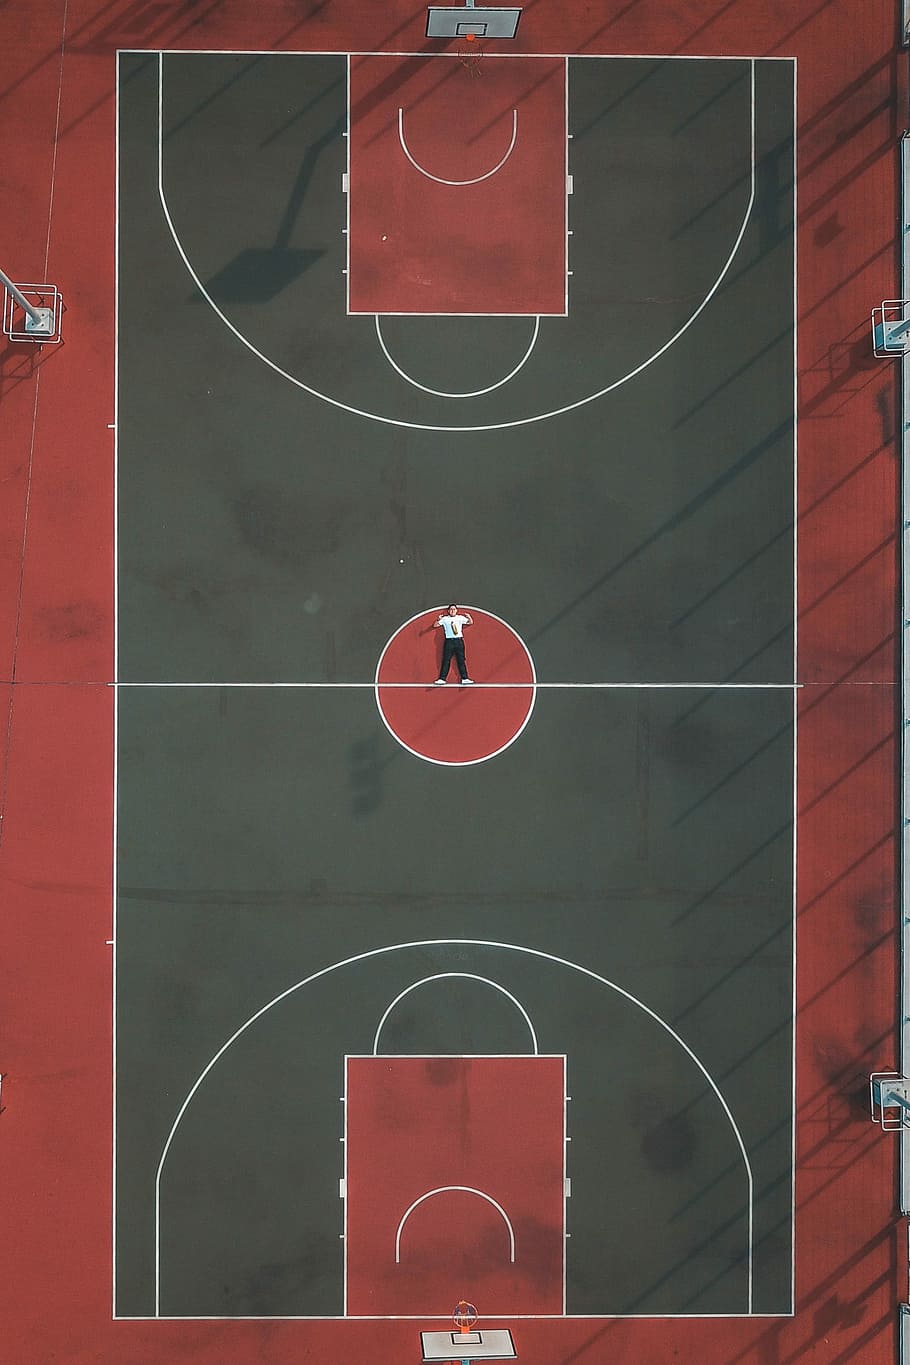 Hd Wallpaper Shots From The Court Man Lying In The Middle Of